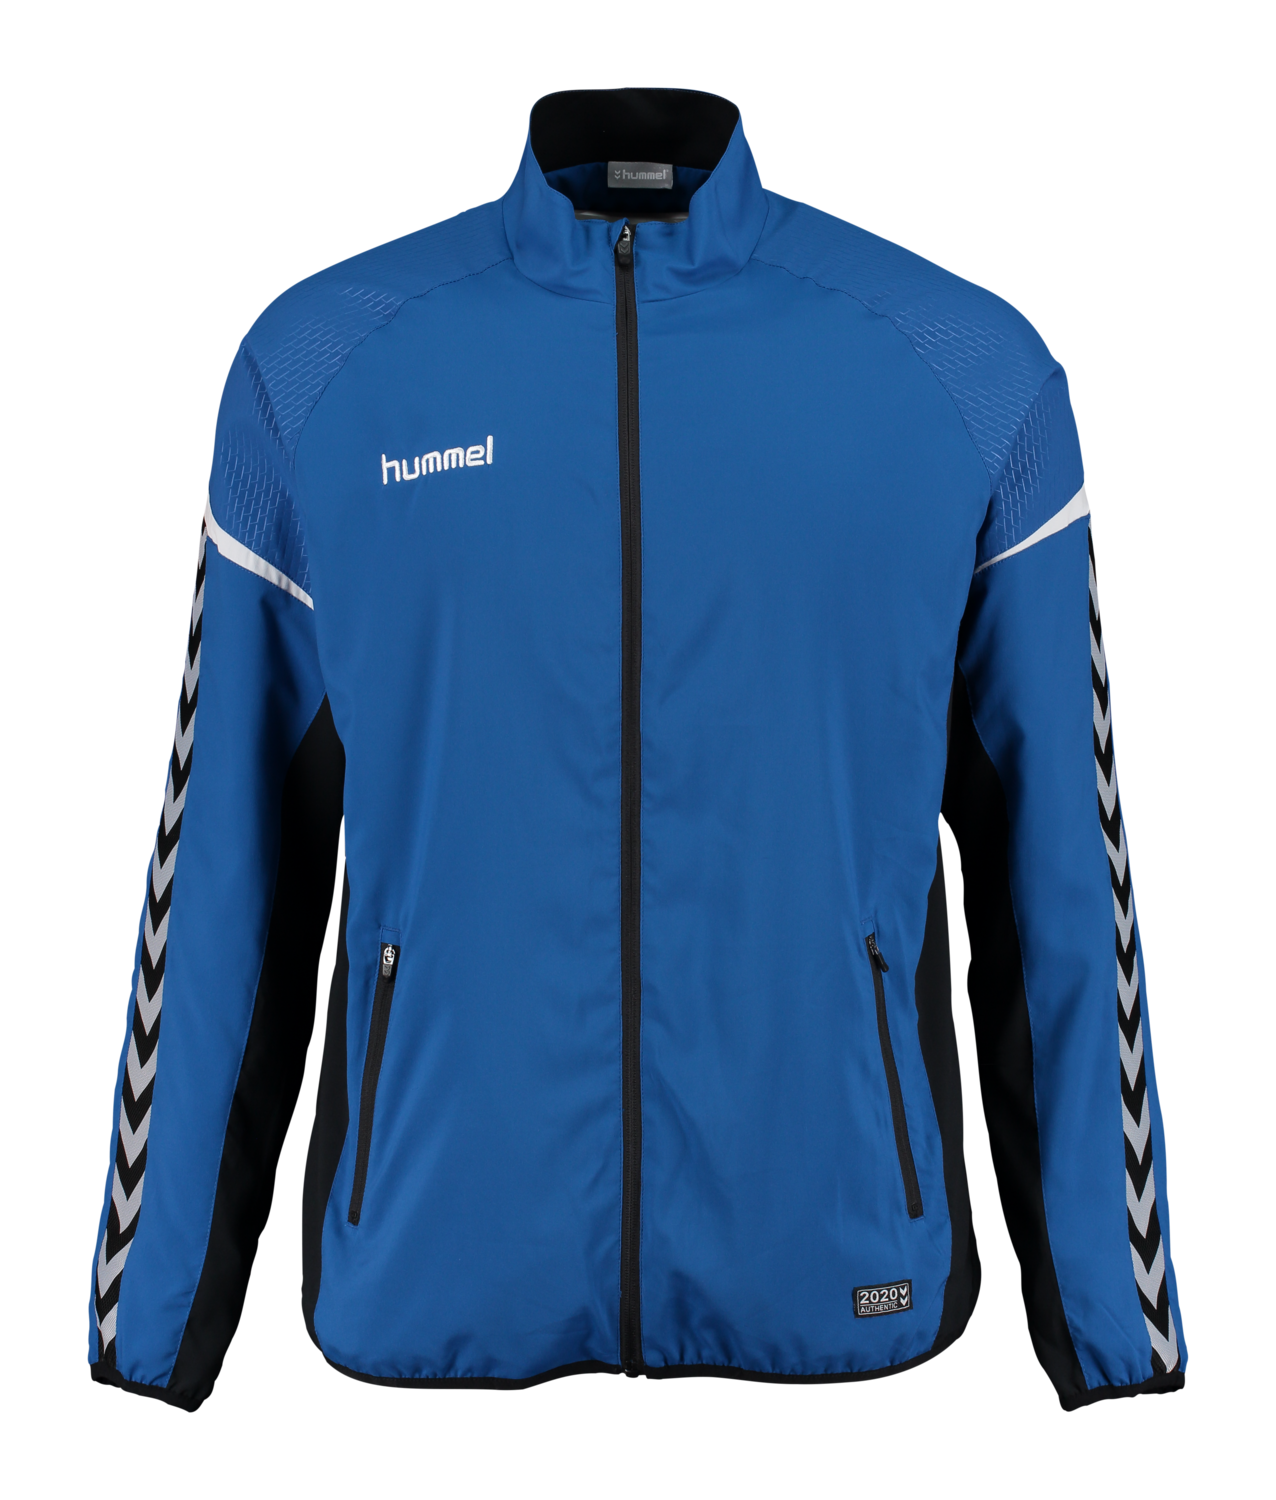 hummel Mens Auth Charge Micro Zip Jacket 